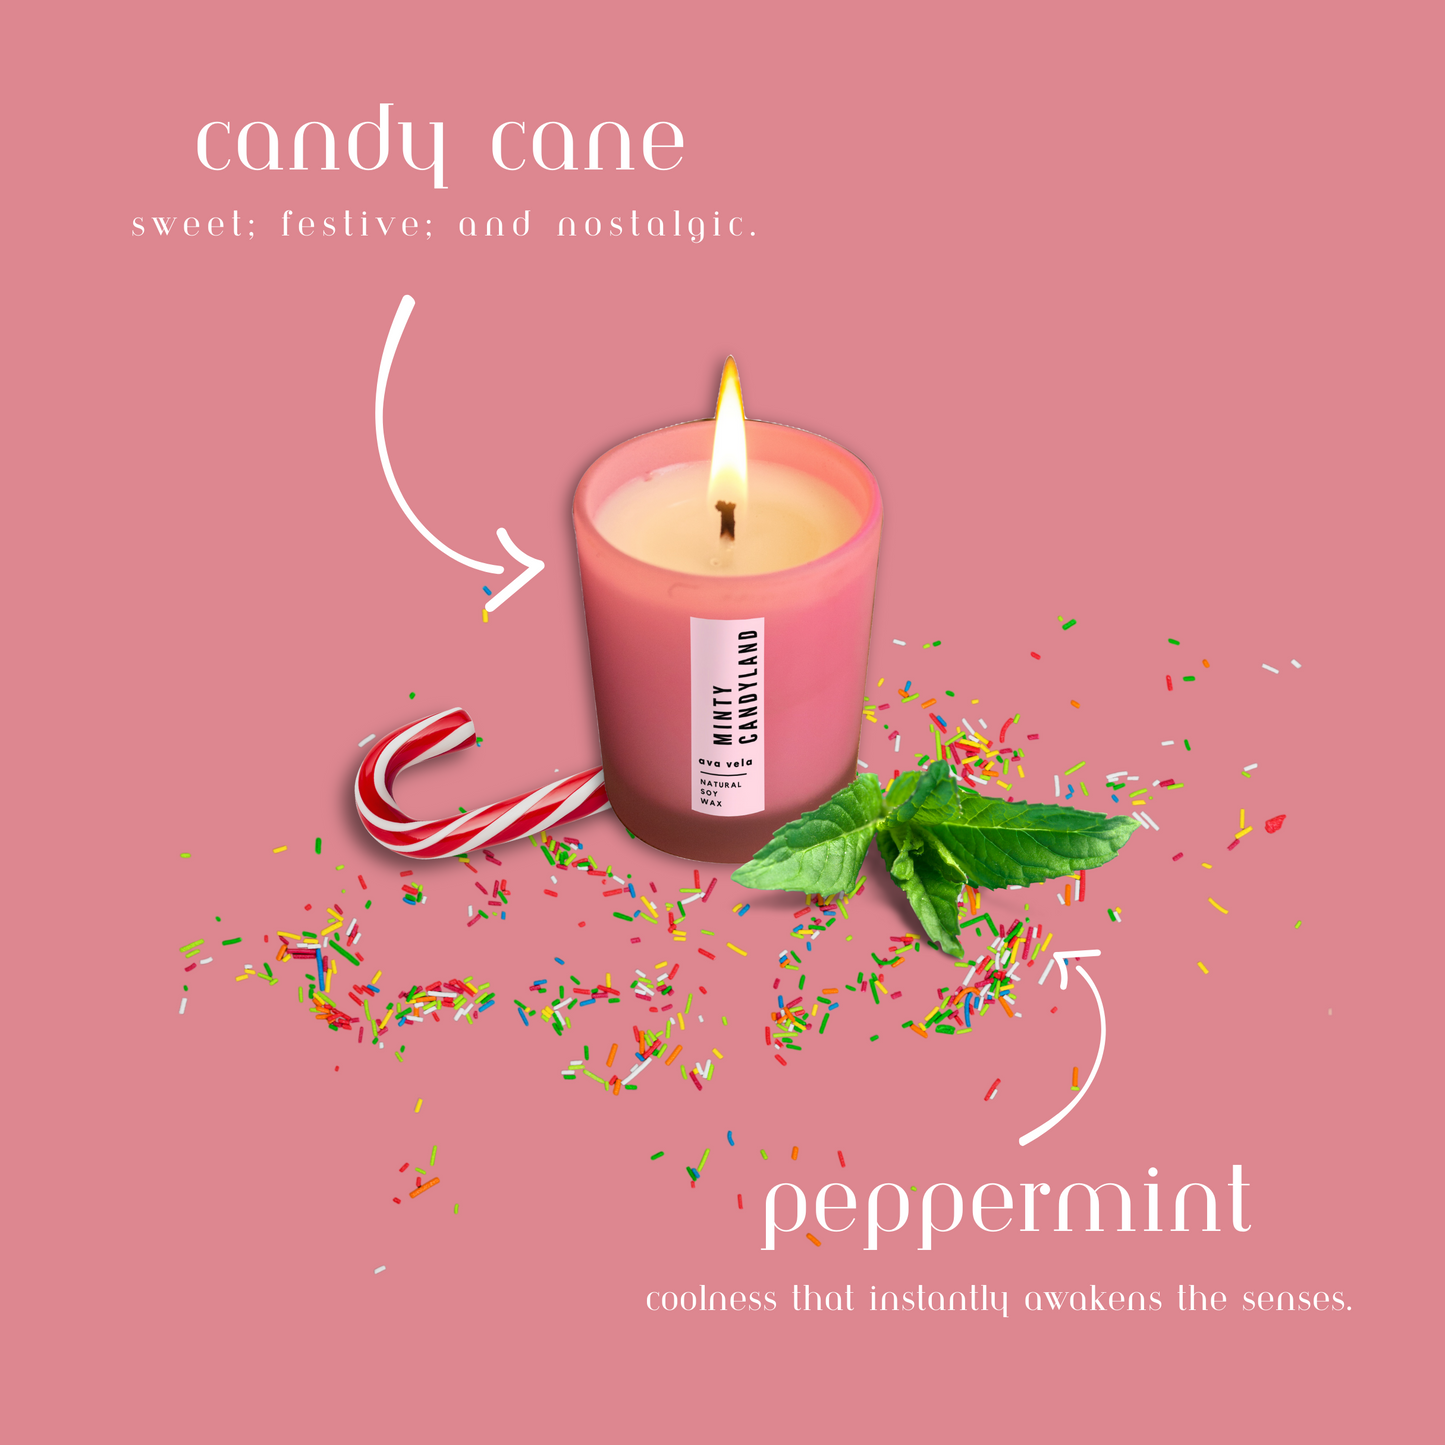 Minty Candy Cane  - Shot Jar Soy Wax Scented Candle 14 hours Burn Time